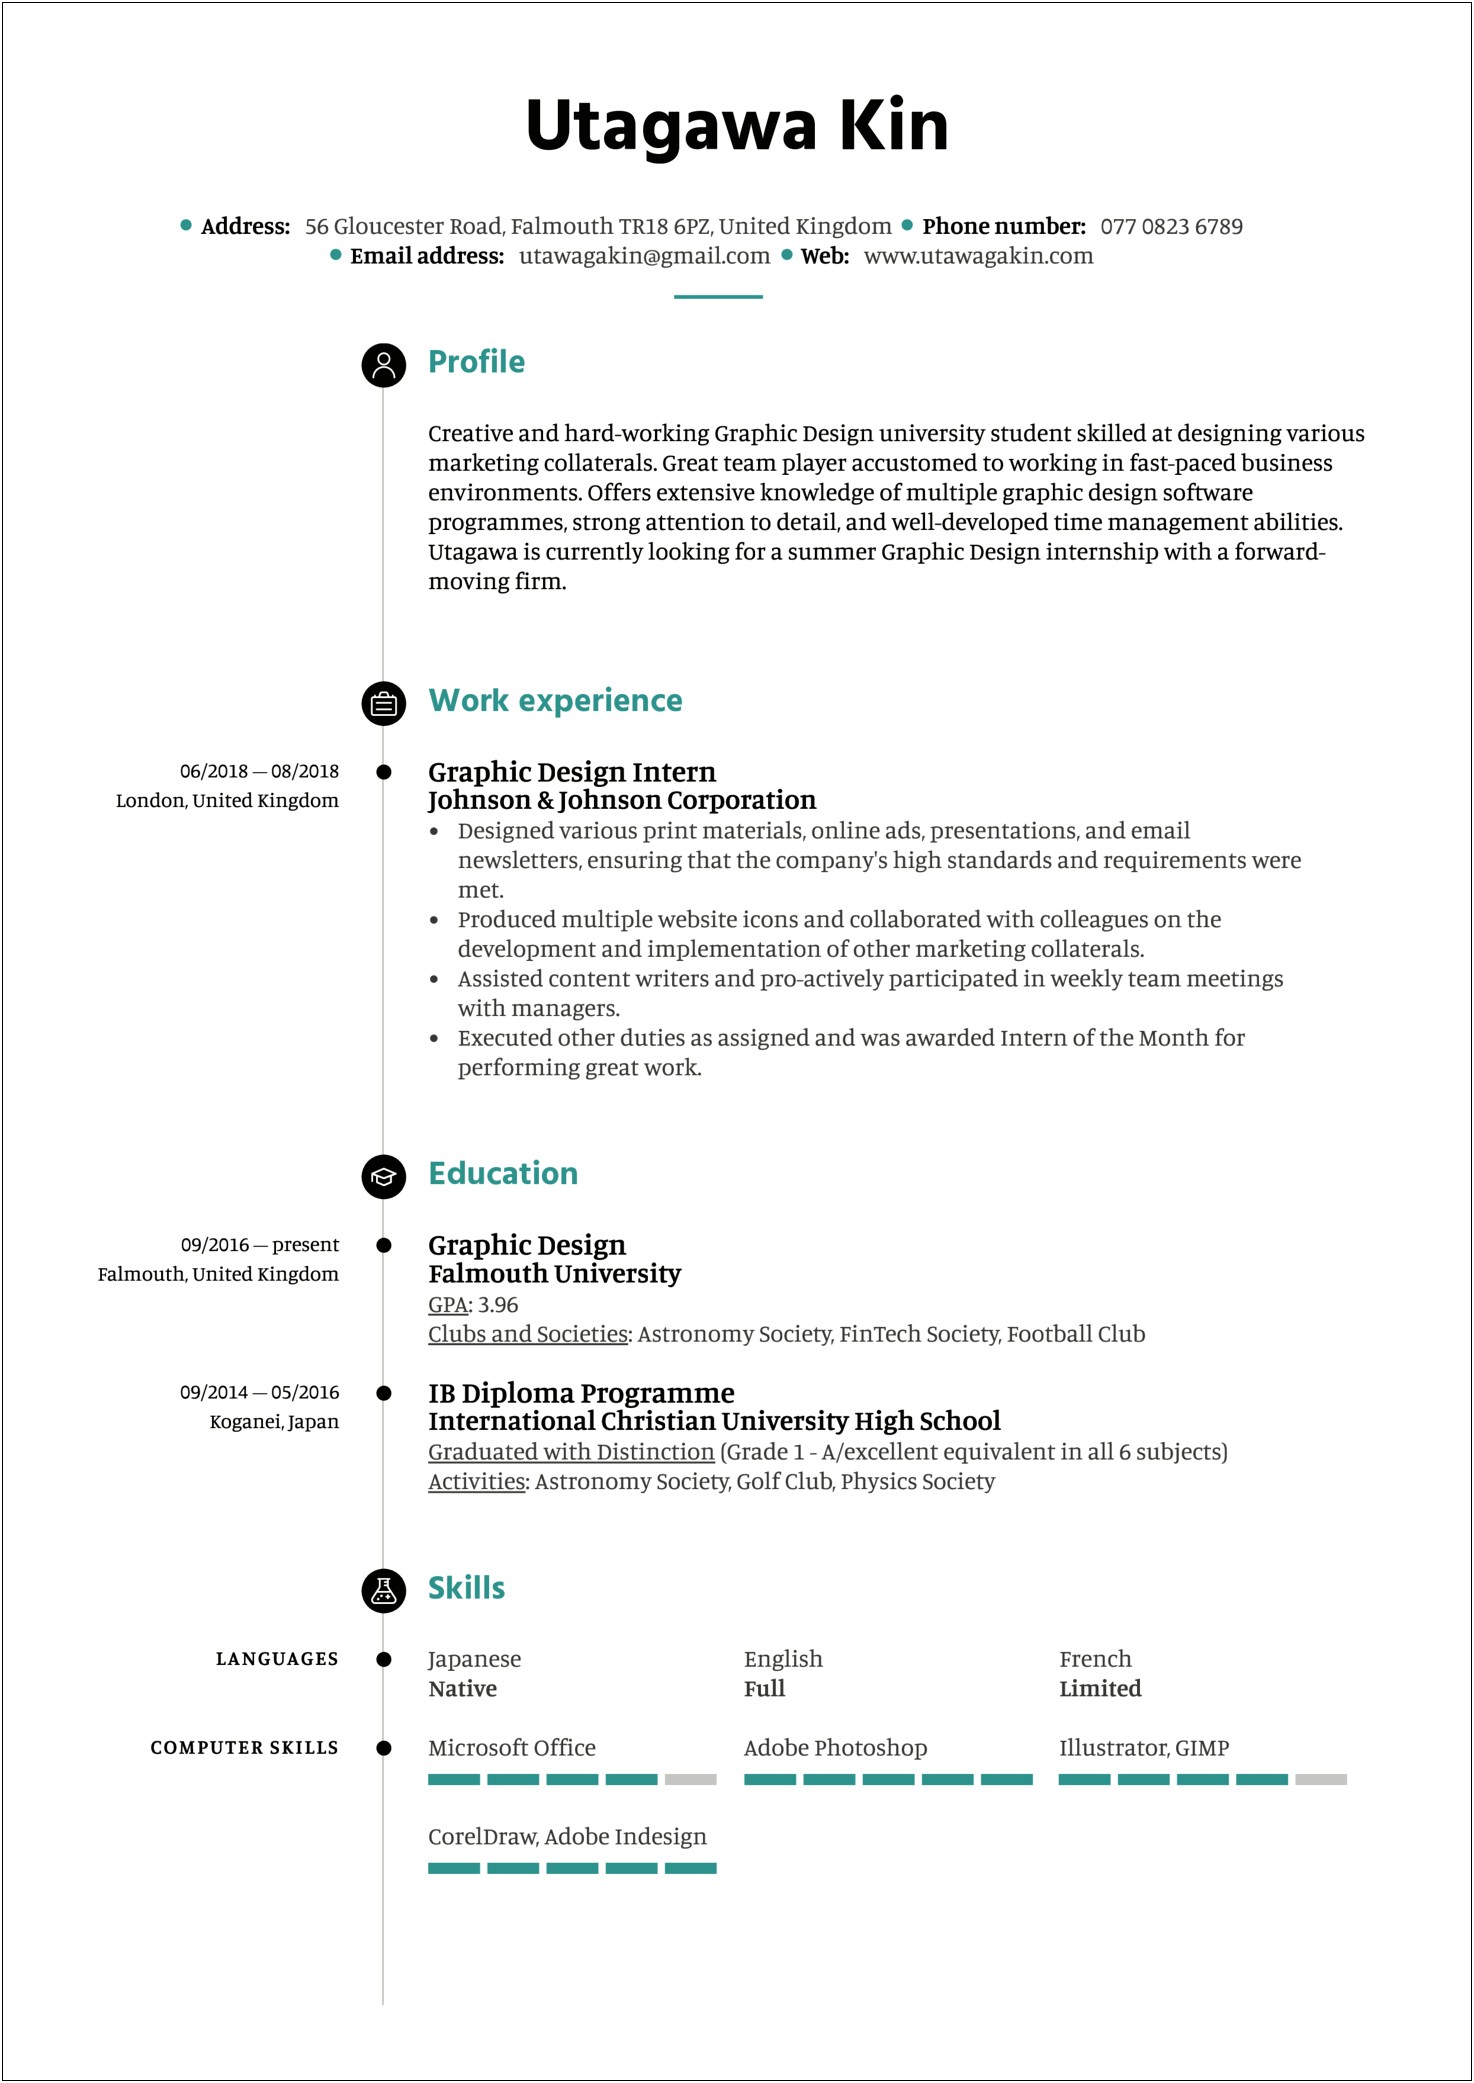 Education On A Graphic Design Job Resume